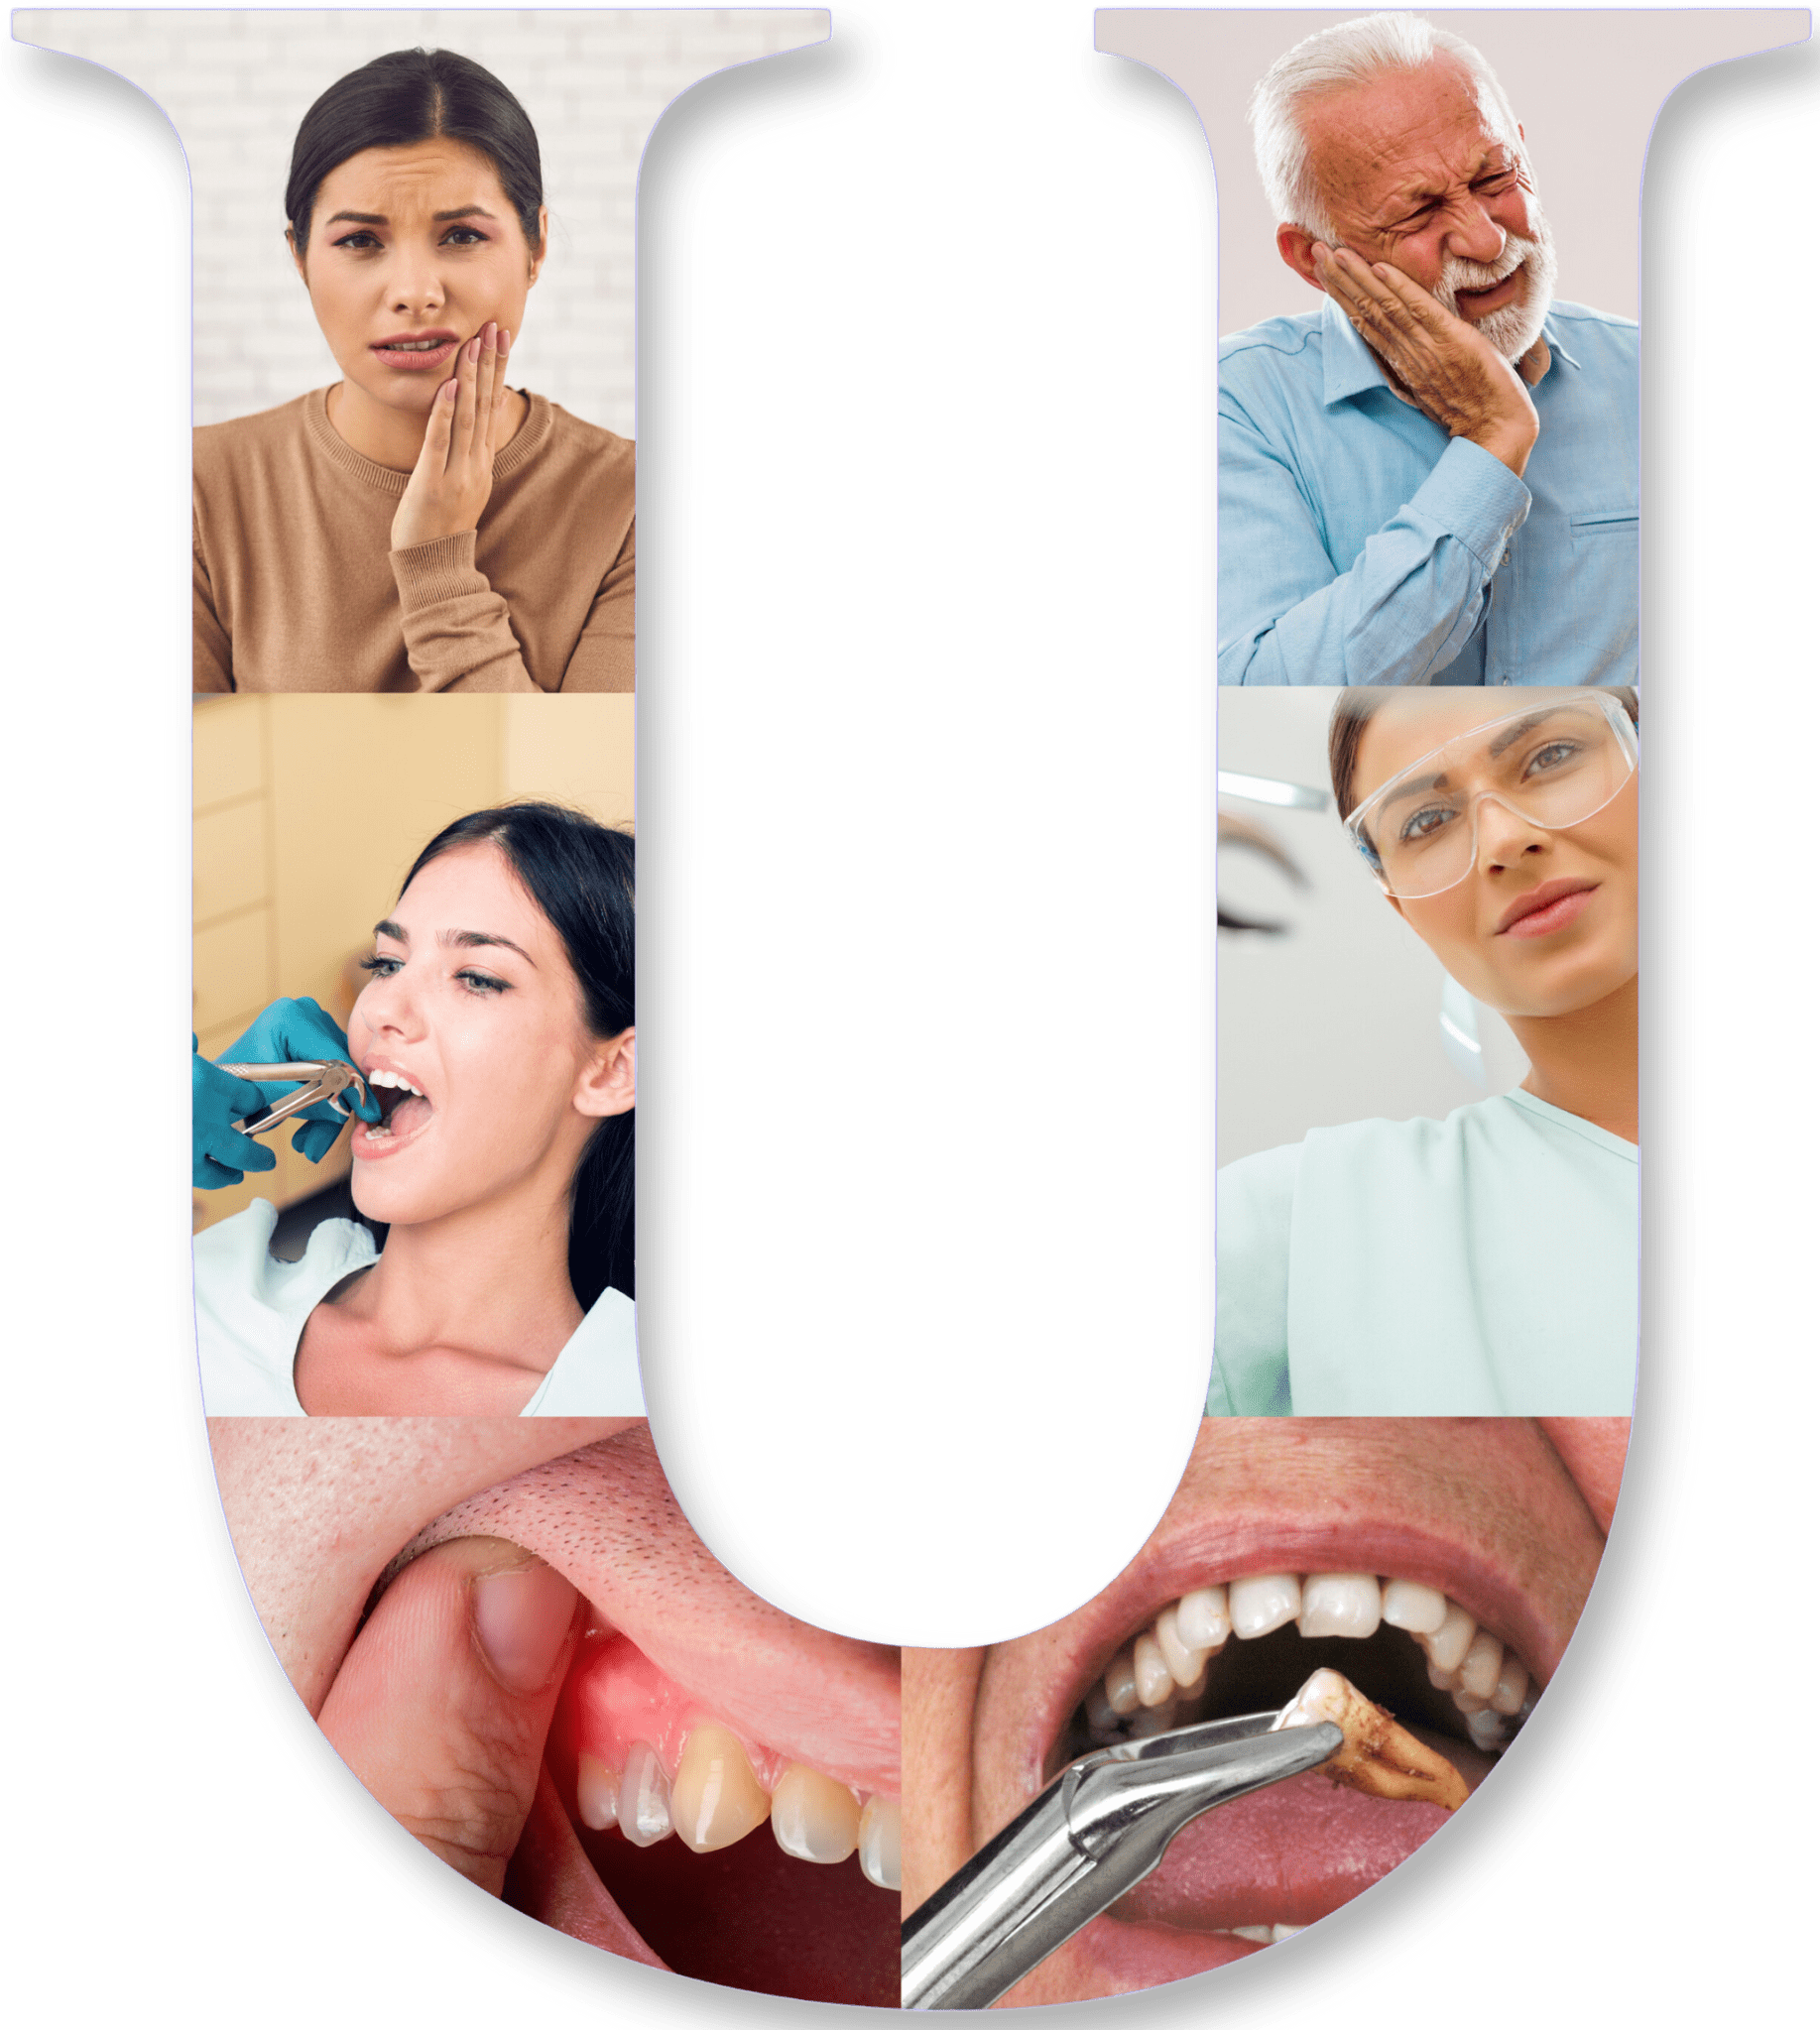 dental emergencies or issues recognized